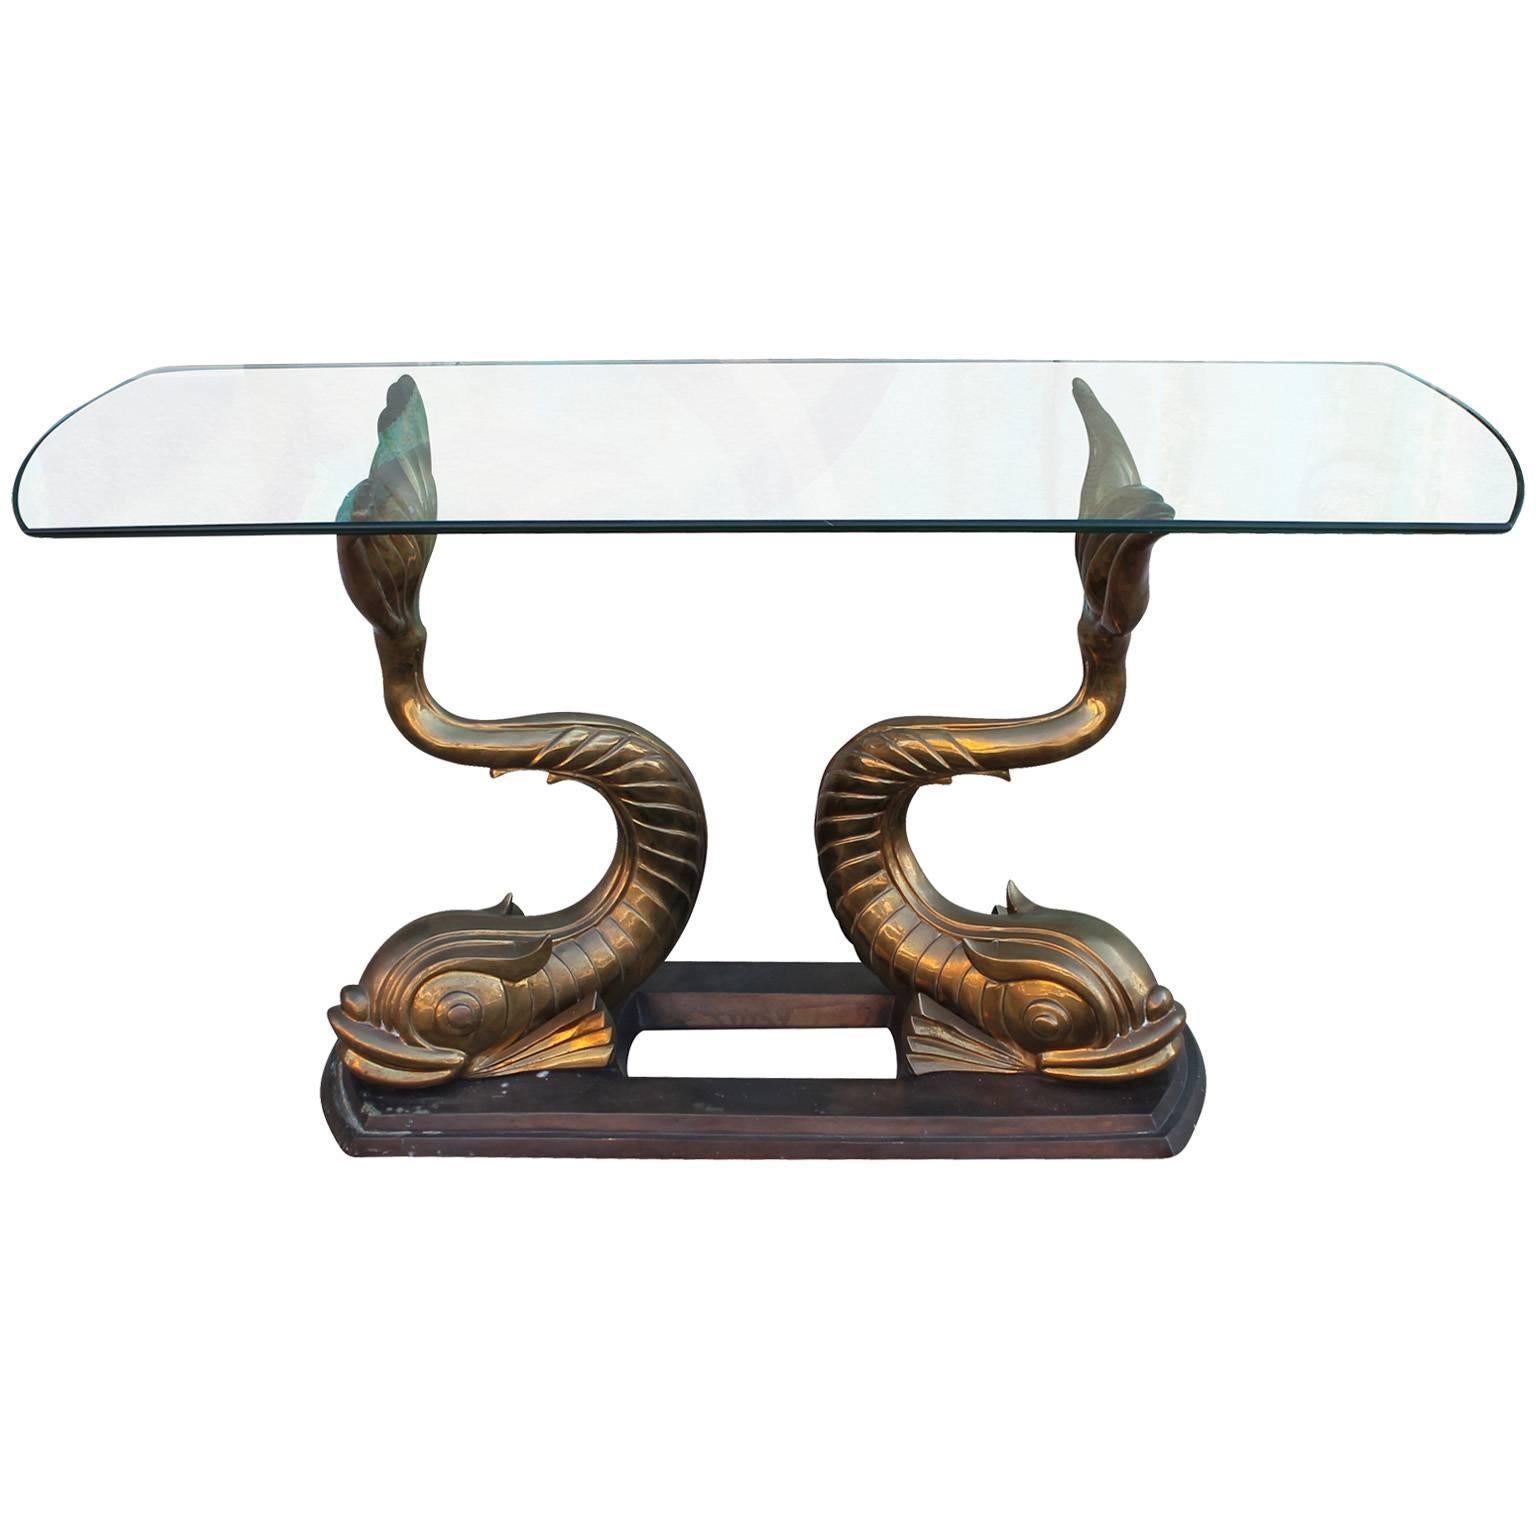 Magnificent Sculptural Brass Koi Fish Console Table